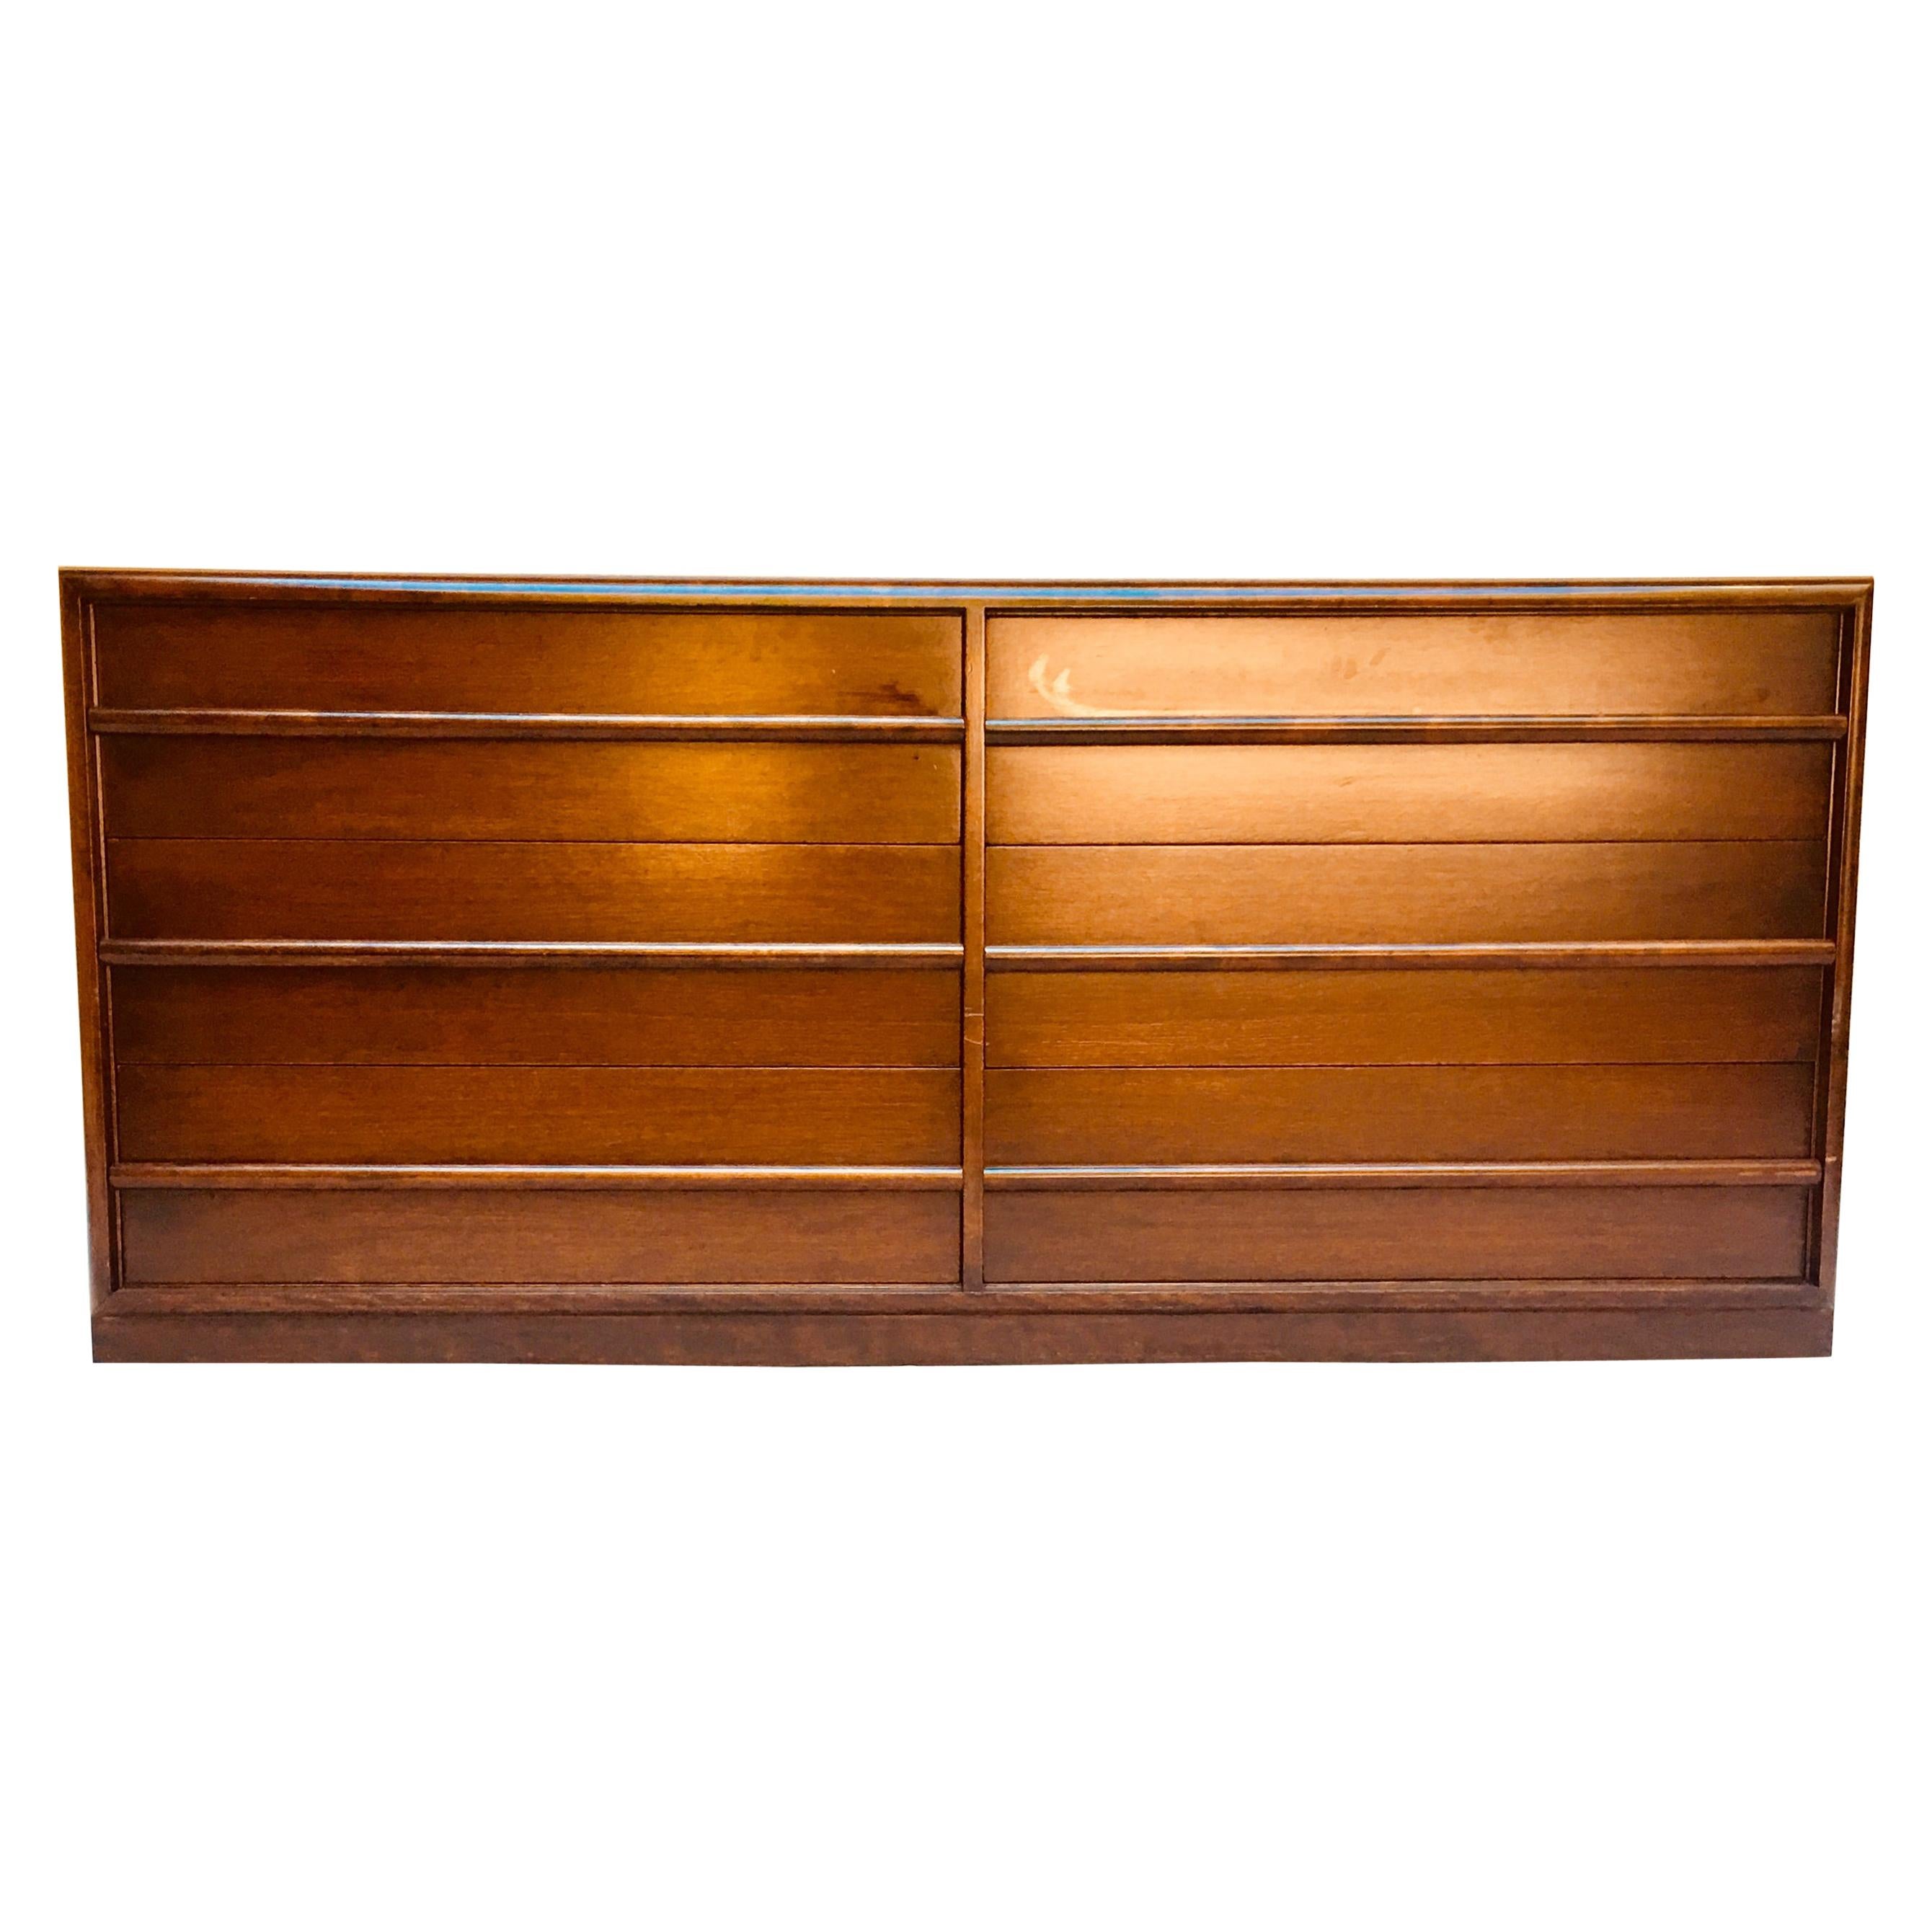 A six-drawer dresser designed by T.H. Robsjohn-Gibbings for Widdicomb, from the 1950s. 
The walnut dresser is in its original Espresso lacquer that has been conserved not refinished and is in excellent vintage condition.
It has its original